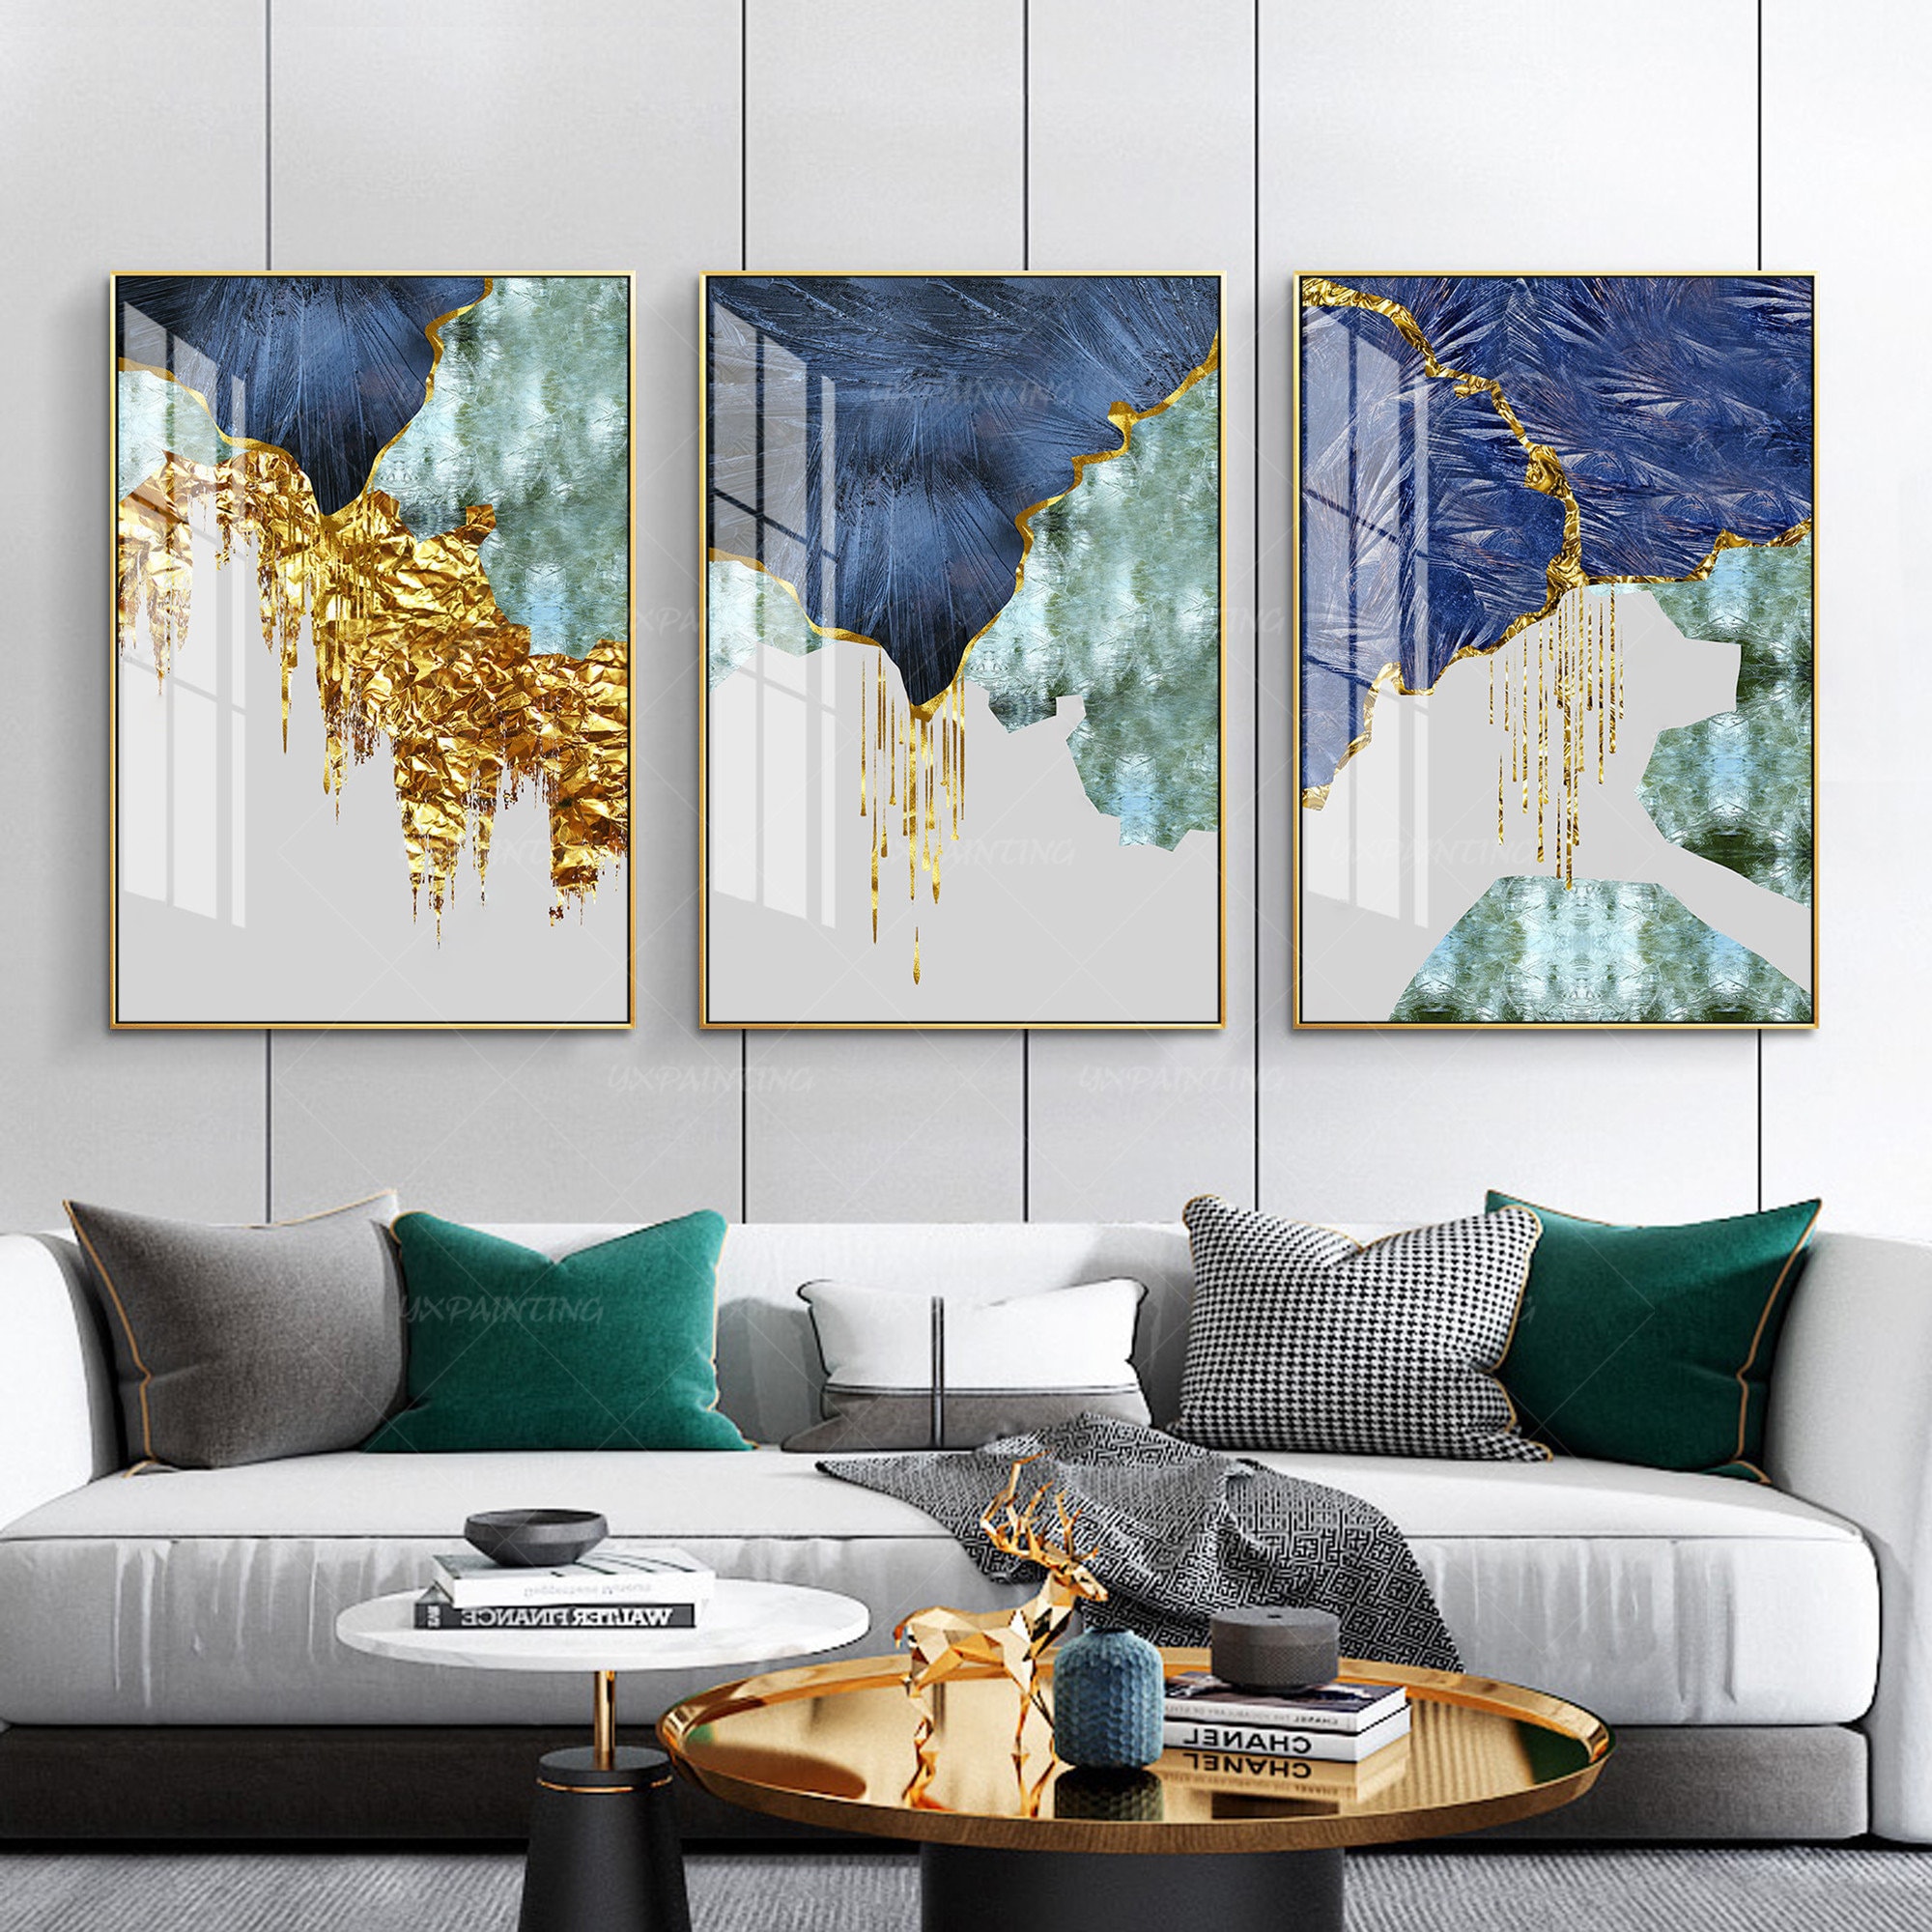 3 Matching Paintings on Canvas Set of Three Wall Art Framed Woman Oil  Paintings 3 Piece Art Work 30x40 Triptych Wall Art Large Paintings Set 